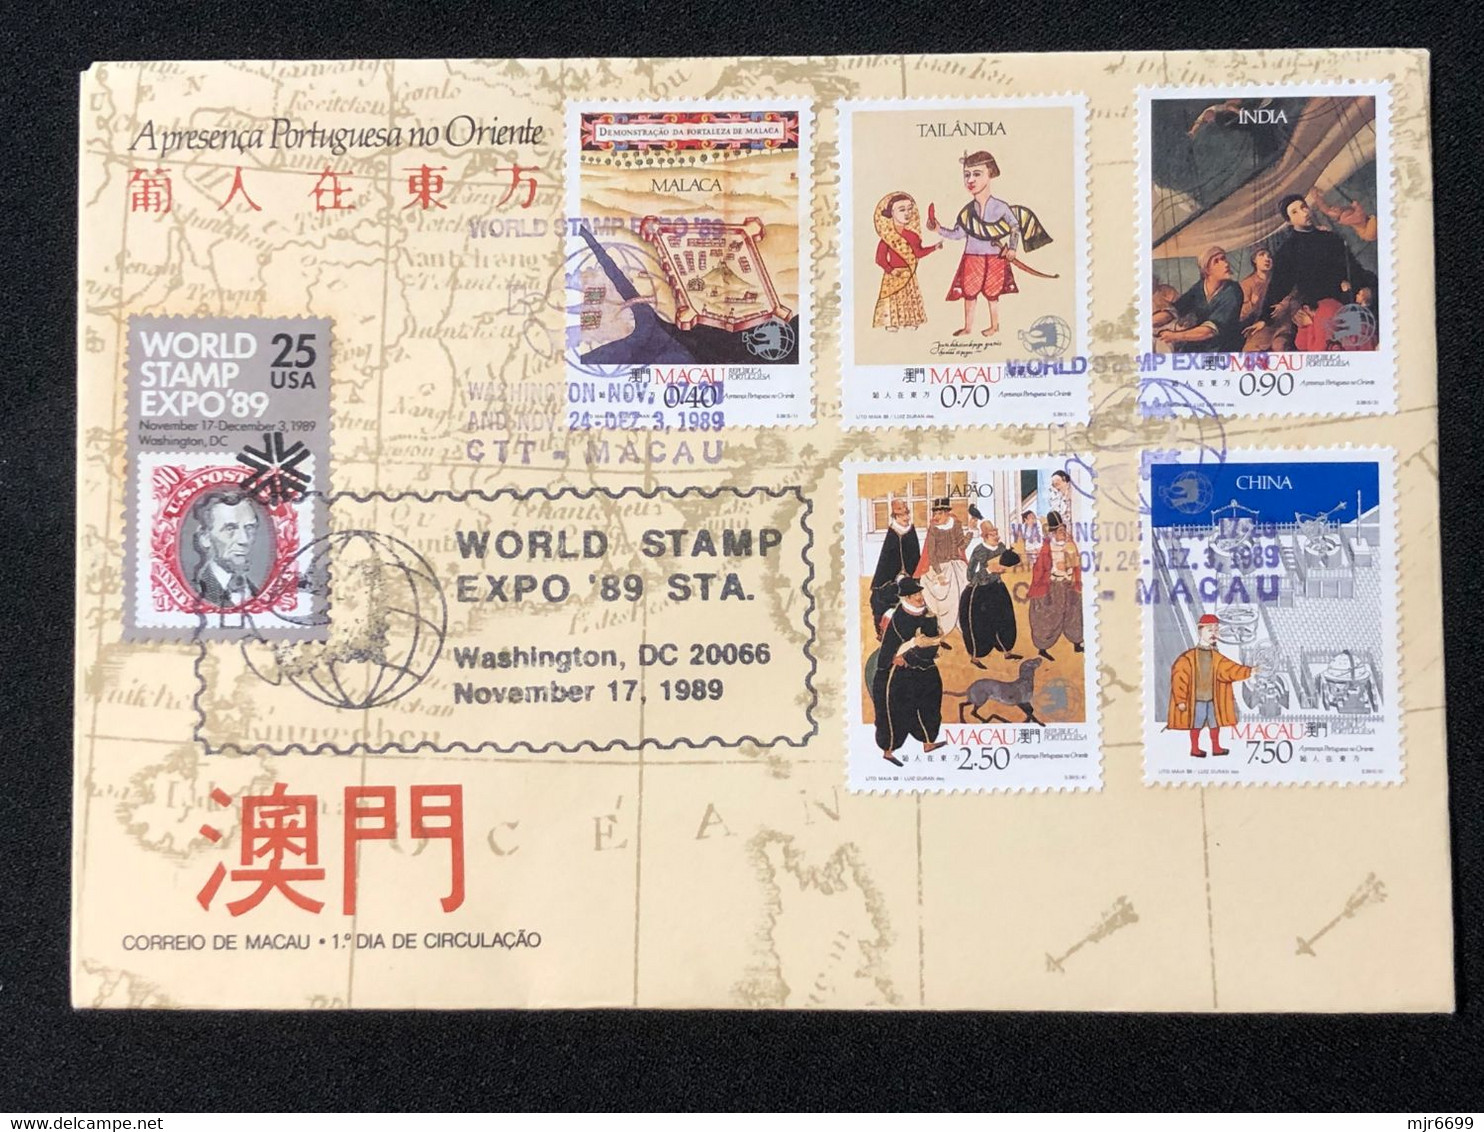 MACAU WORLD STAMP EXPO"90 (WASHINGTHON) COMMEMORATIVE CANCELLATION ON FDC COVER 1 - Lettres & Documents